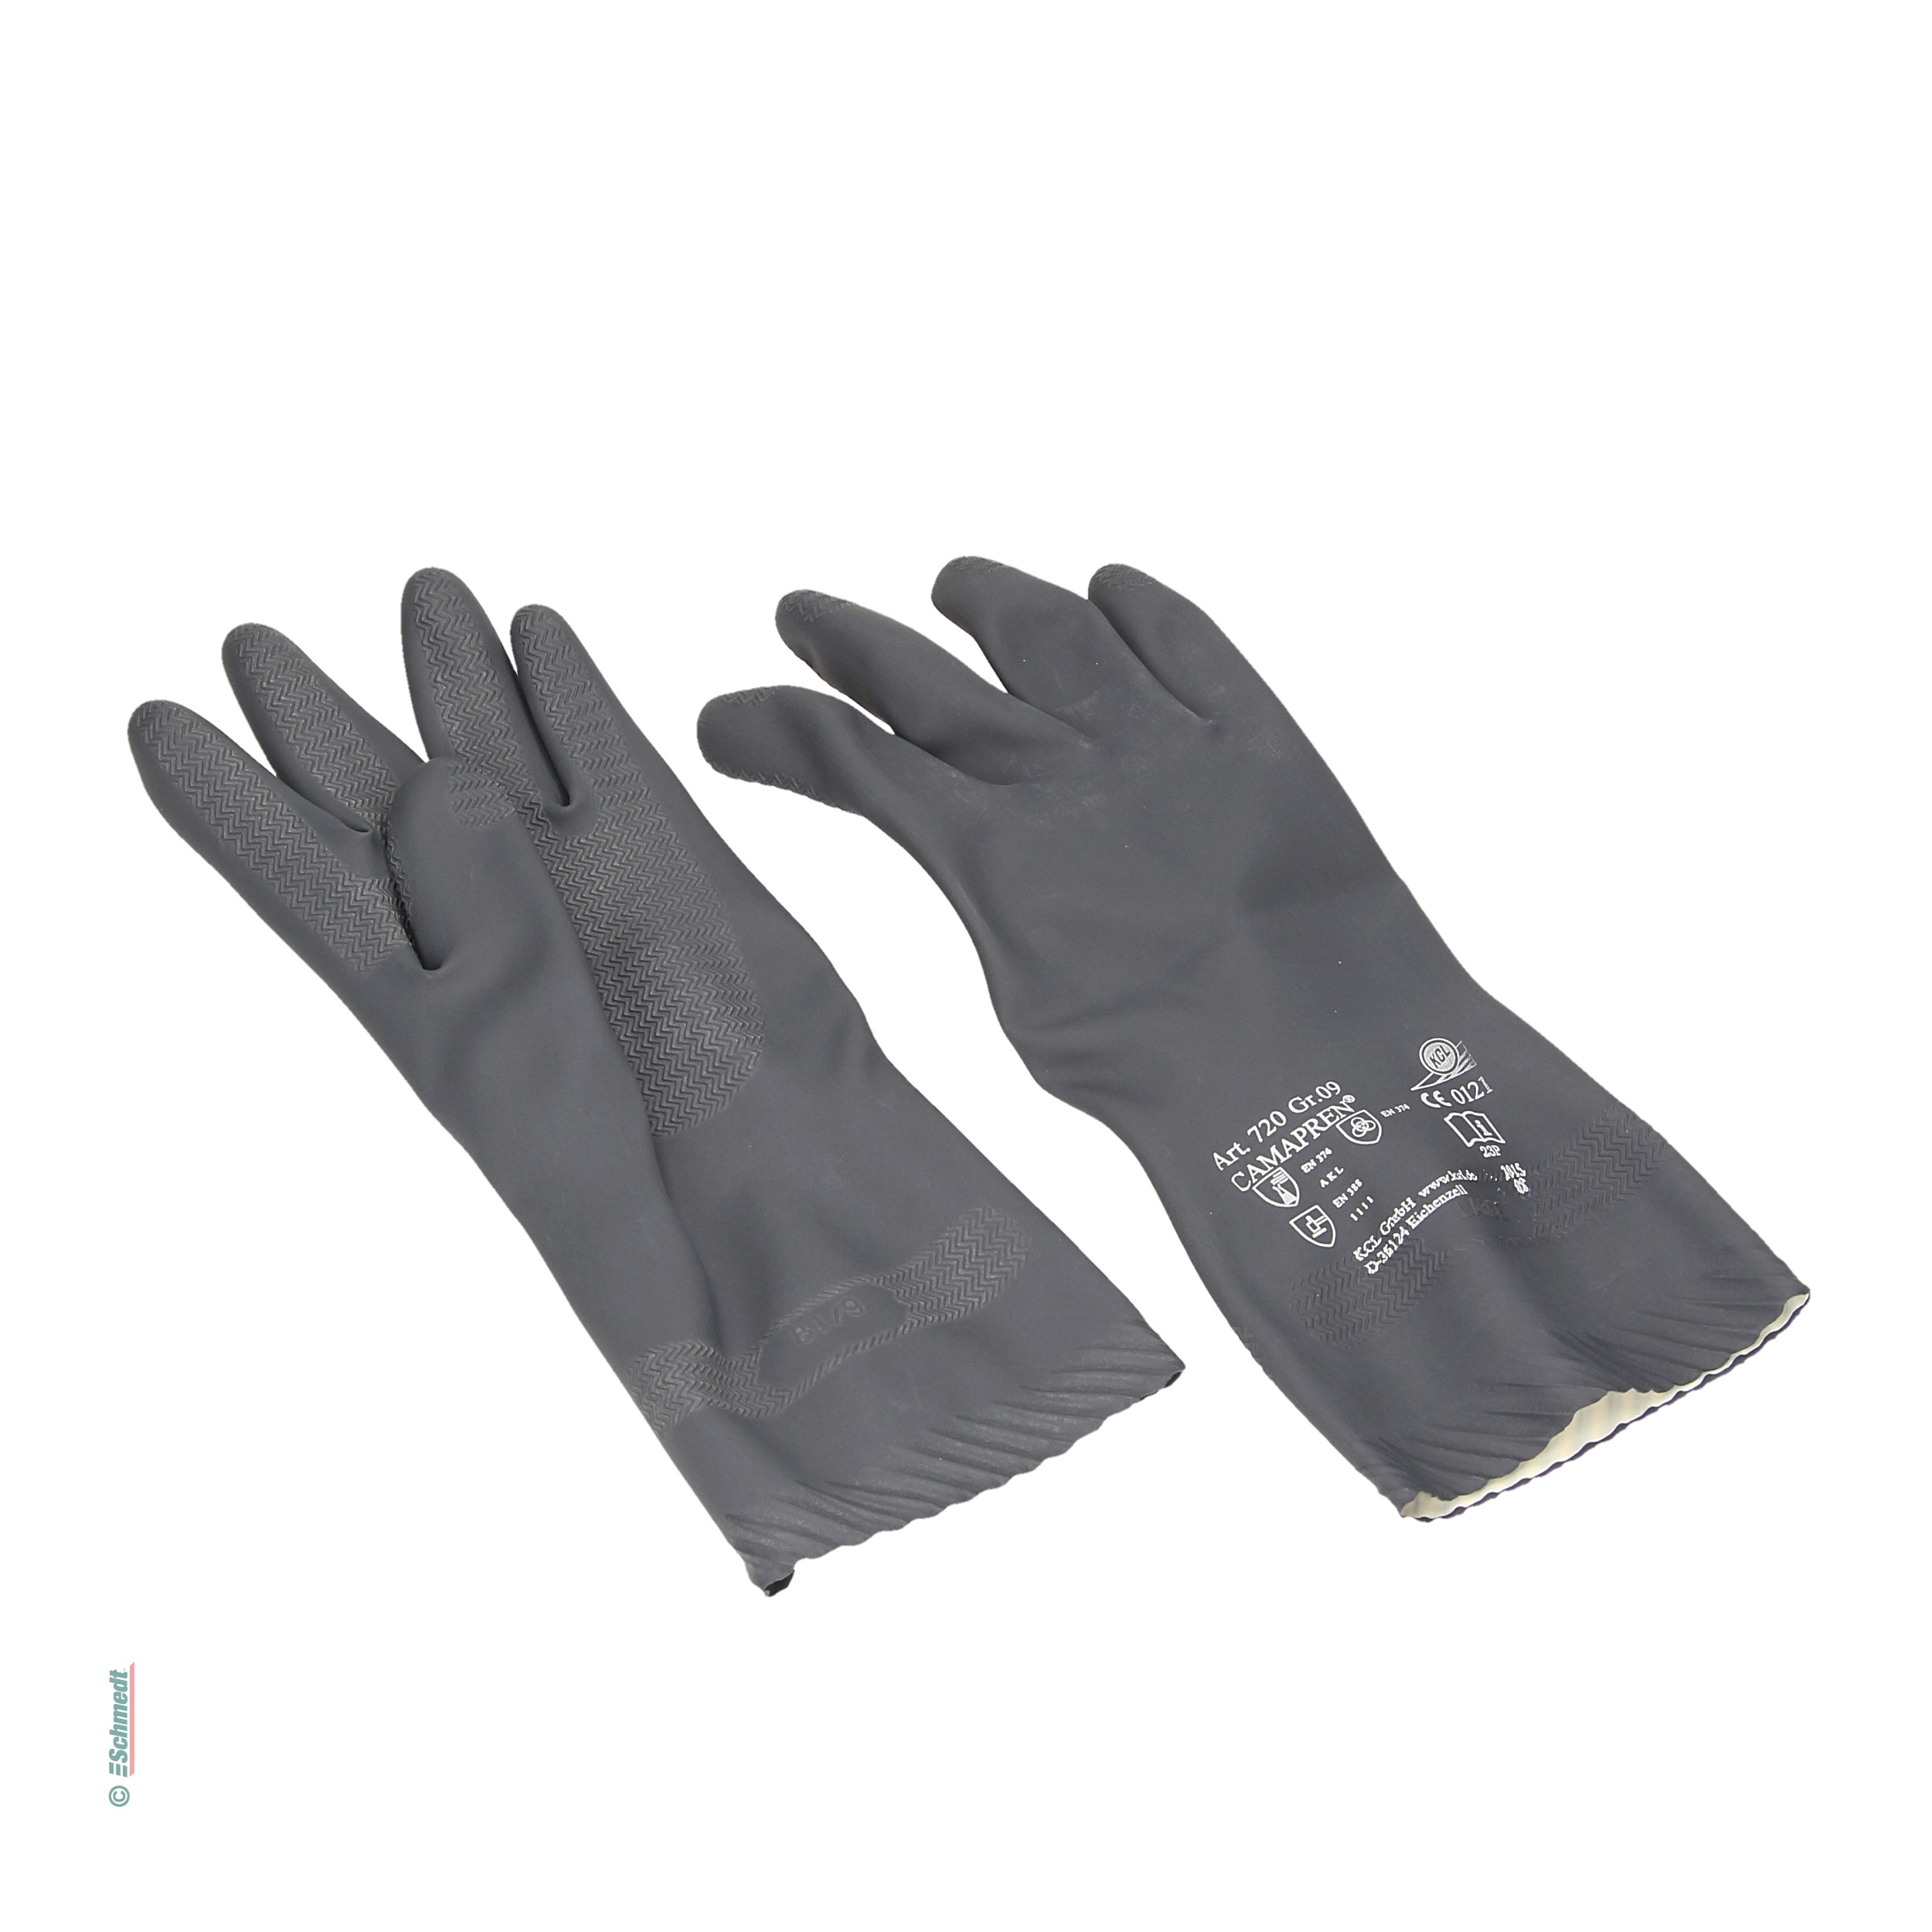 Safety gloves - made of chloroprene, black, flock-lined - Protection of the hands against oil, grease, acids and bases...